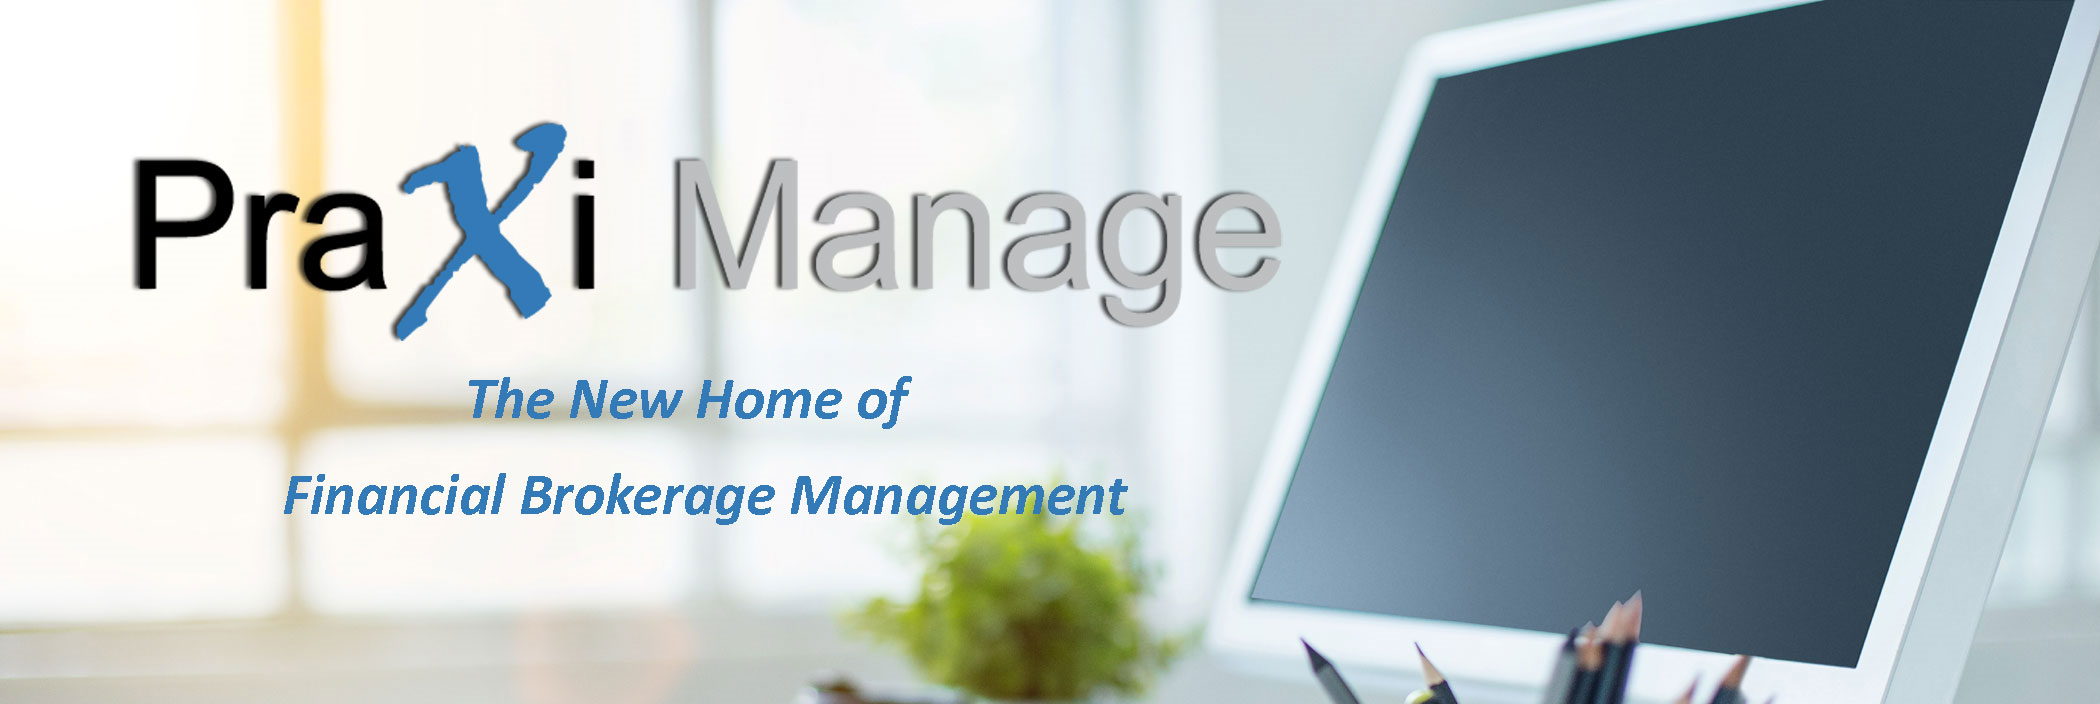 Praxi Manage - the New Home of Brokerage Management!